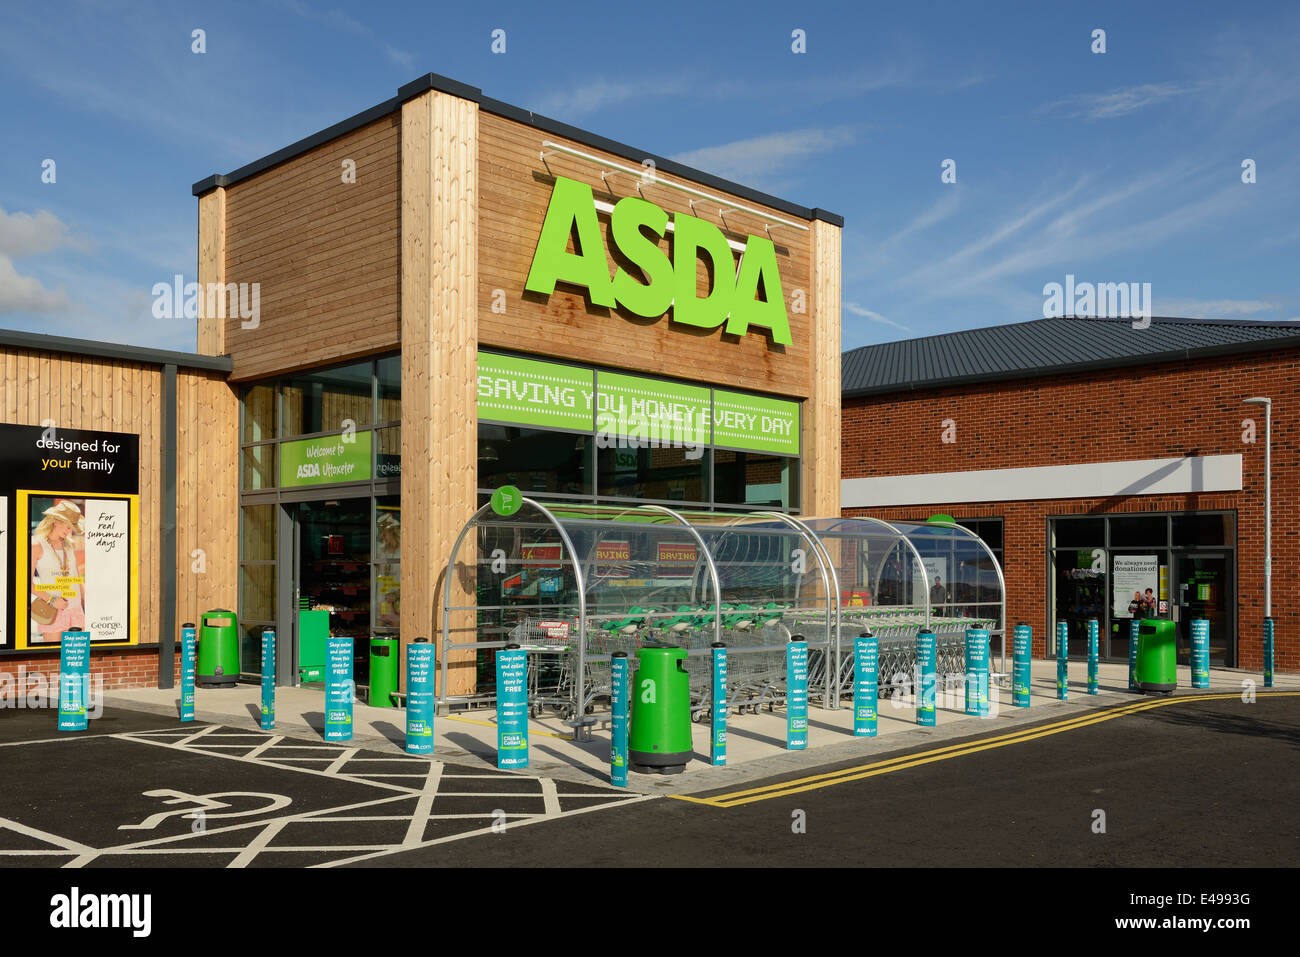 PHOTO  ASDA MOUNT PLEASANT HULL SUPERSTORE ON THE RETAIL PARK AT THE JUNCTION OF 